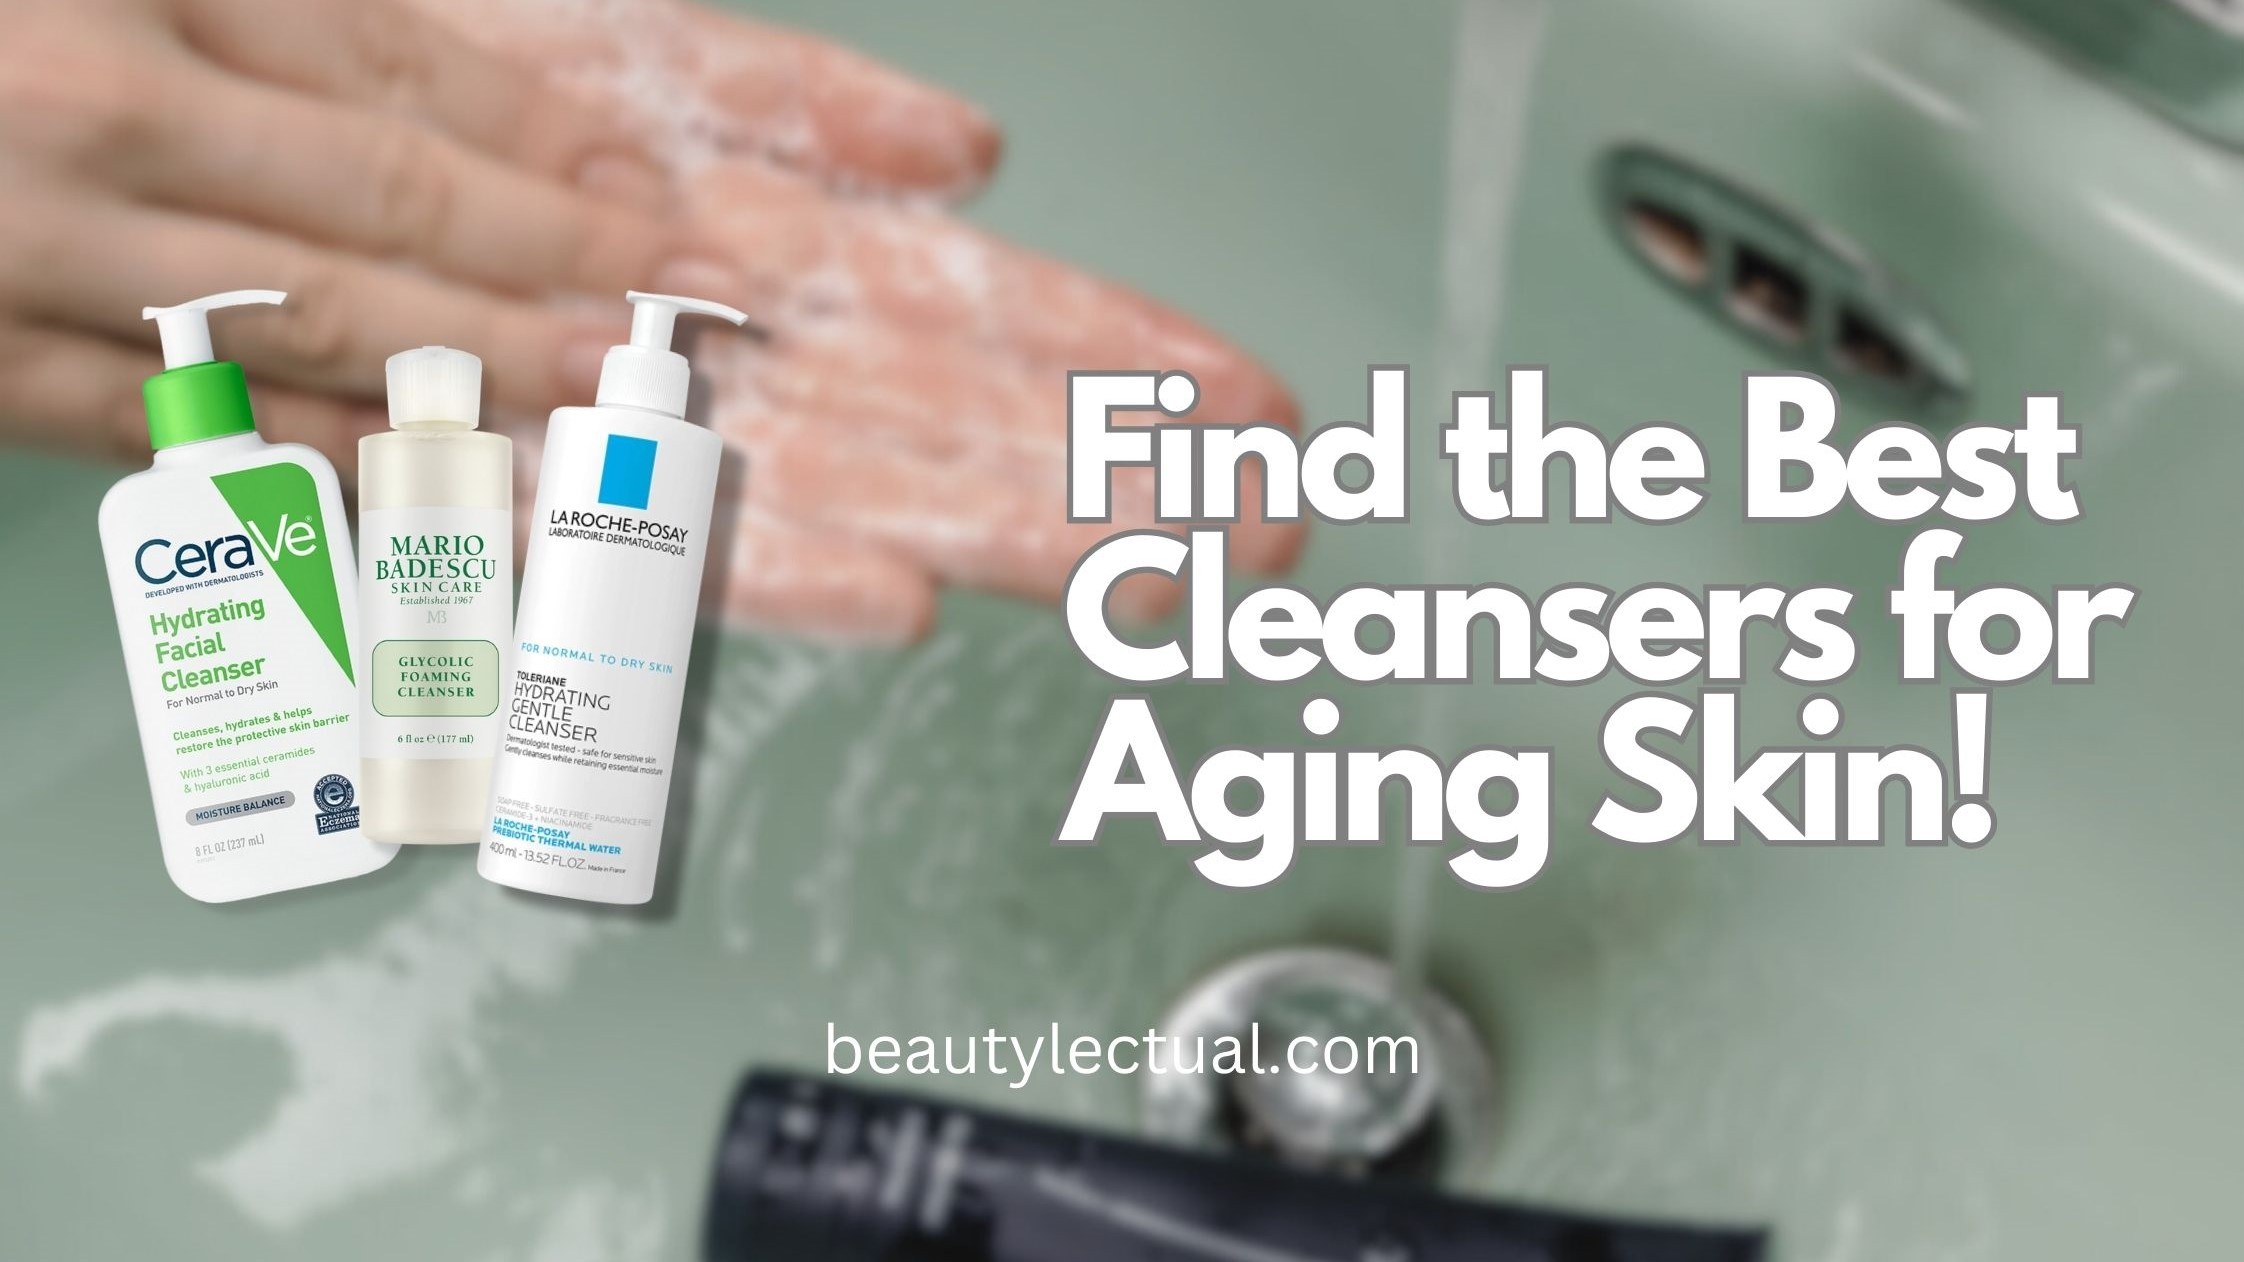 Find the Best Cleansers for Aging Skin